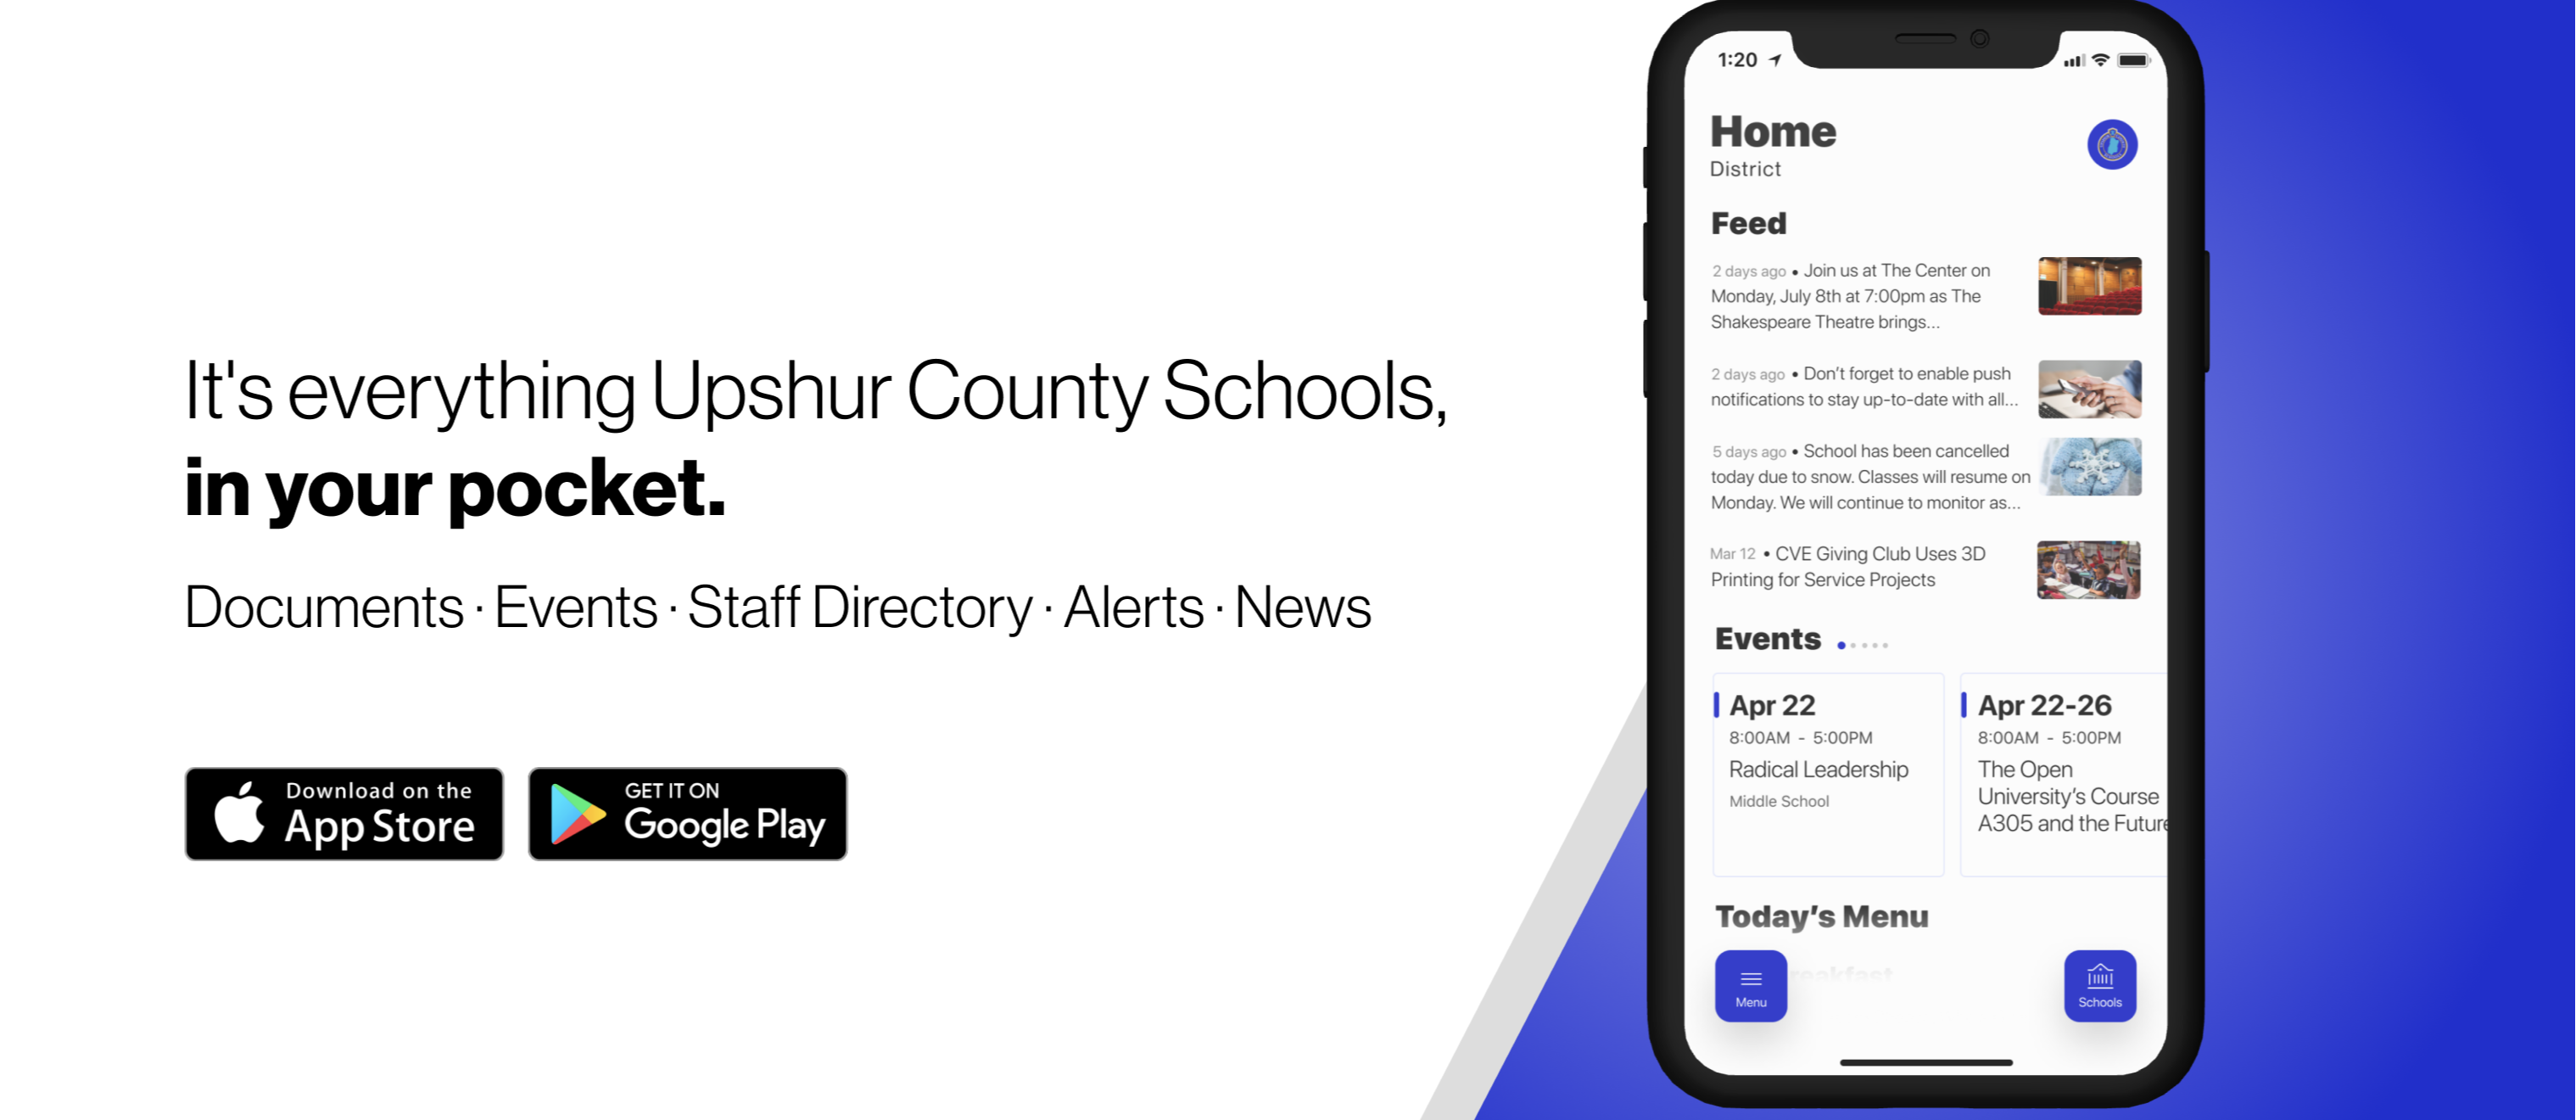 It's everything Upshur County Schools in your pocket. Documents, Events, Alerts, Staff Directory, News. Download in Google Play or App Store